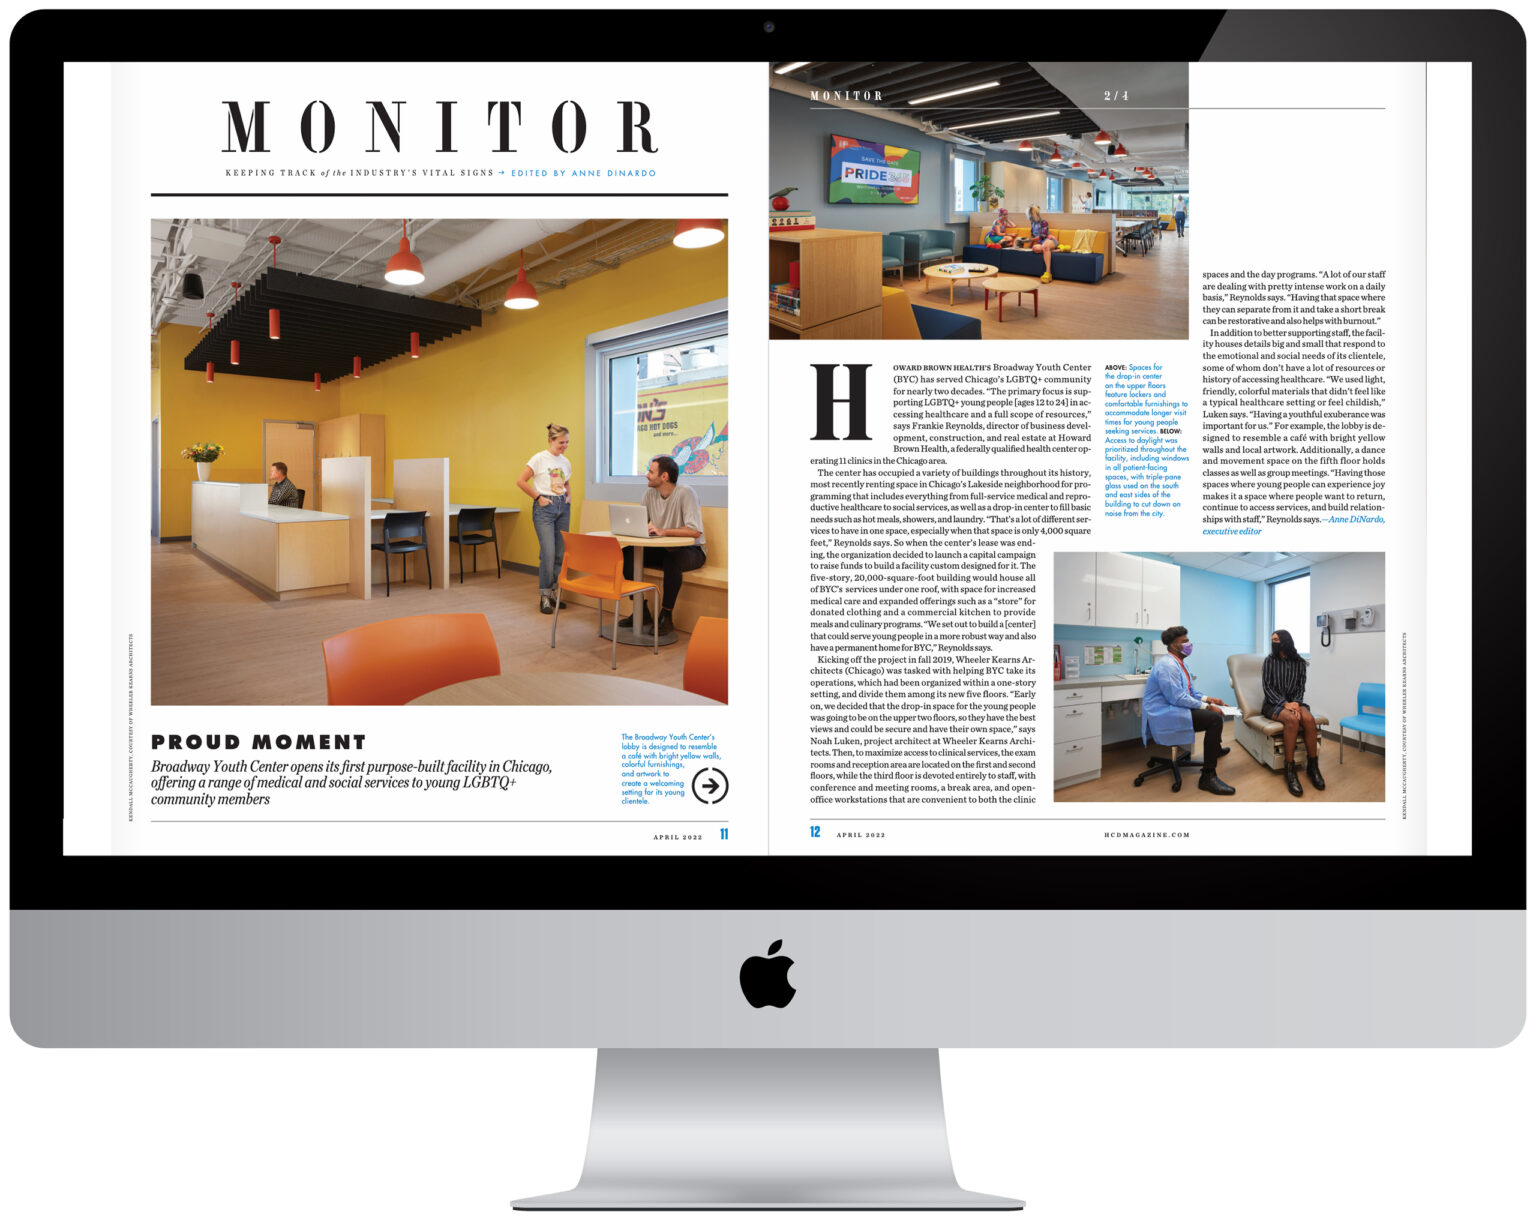 broadway-youth-center-is-featured-in-healthcare-design-magazine-s-april-2022-issue-wheeler